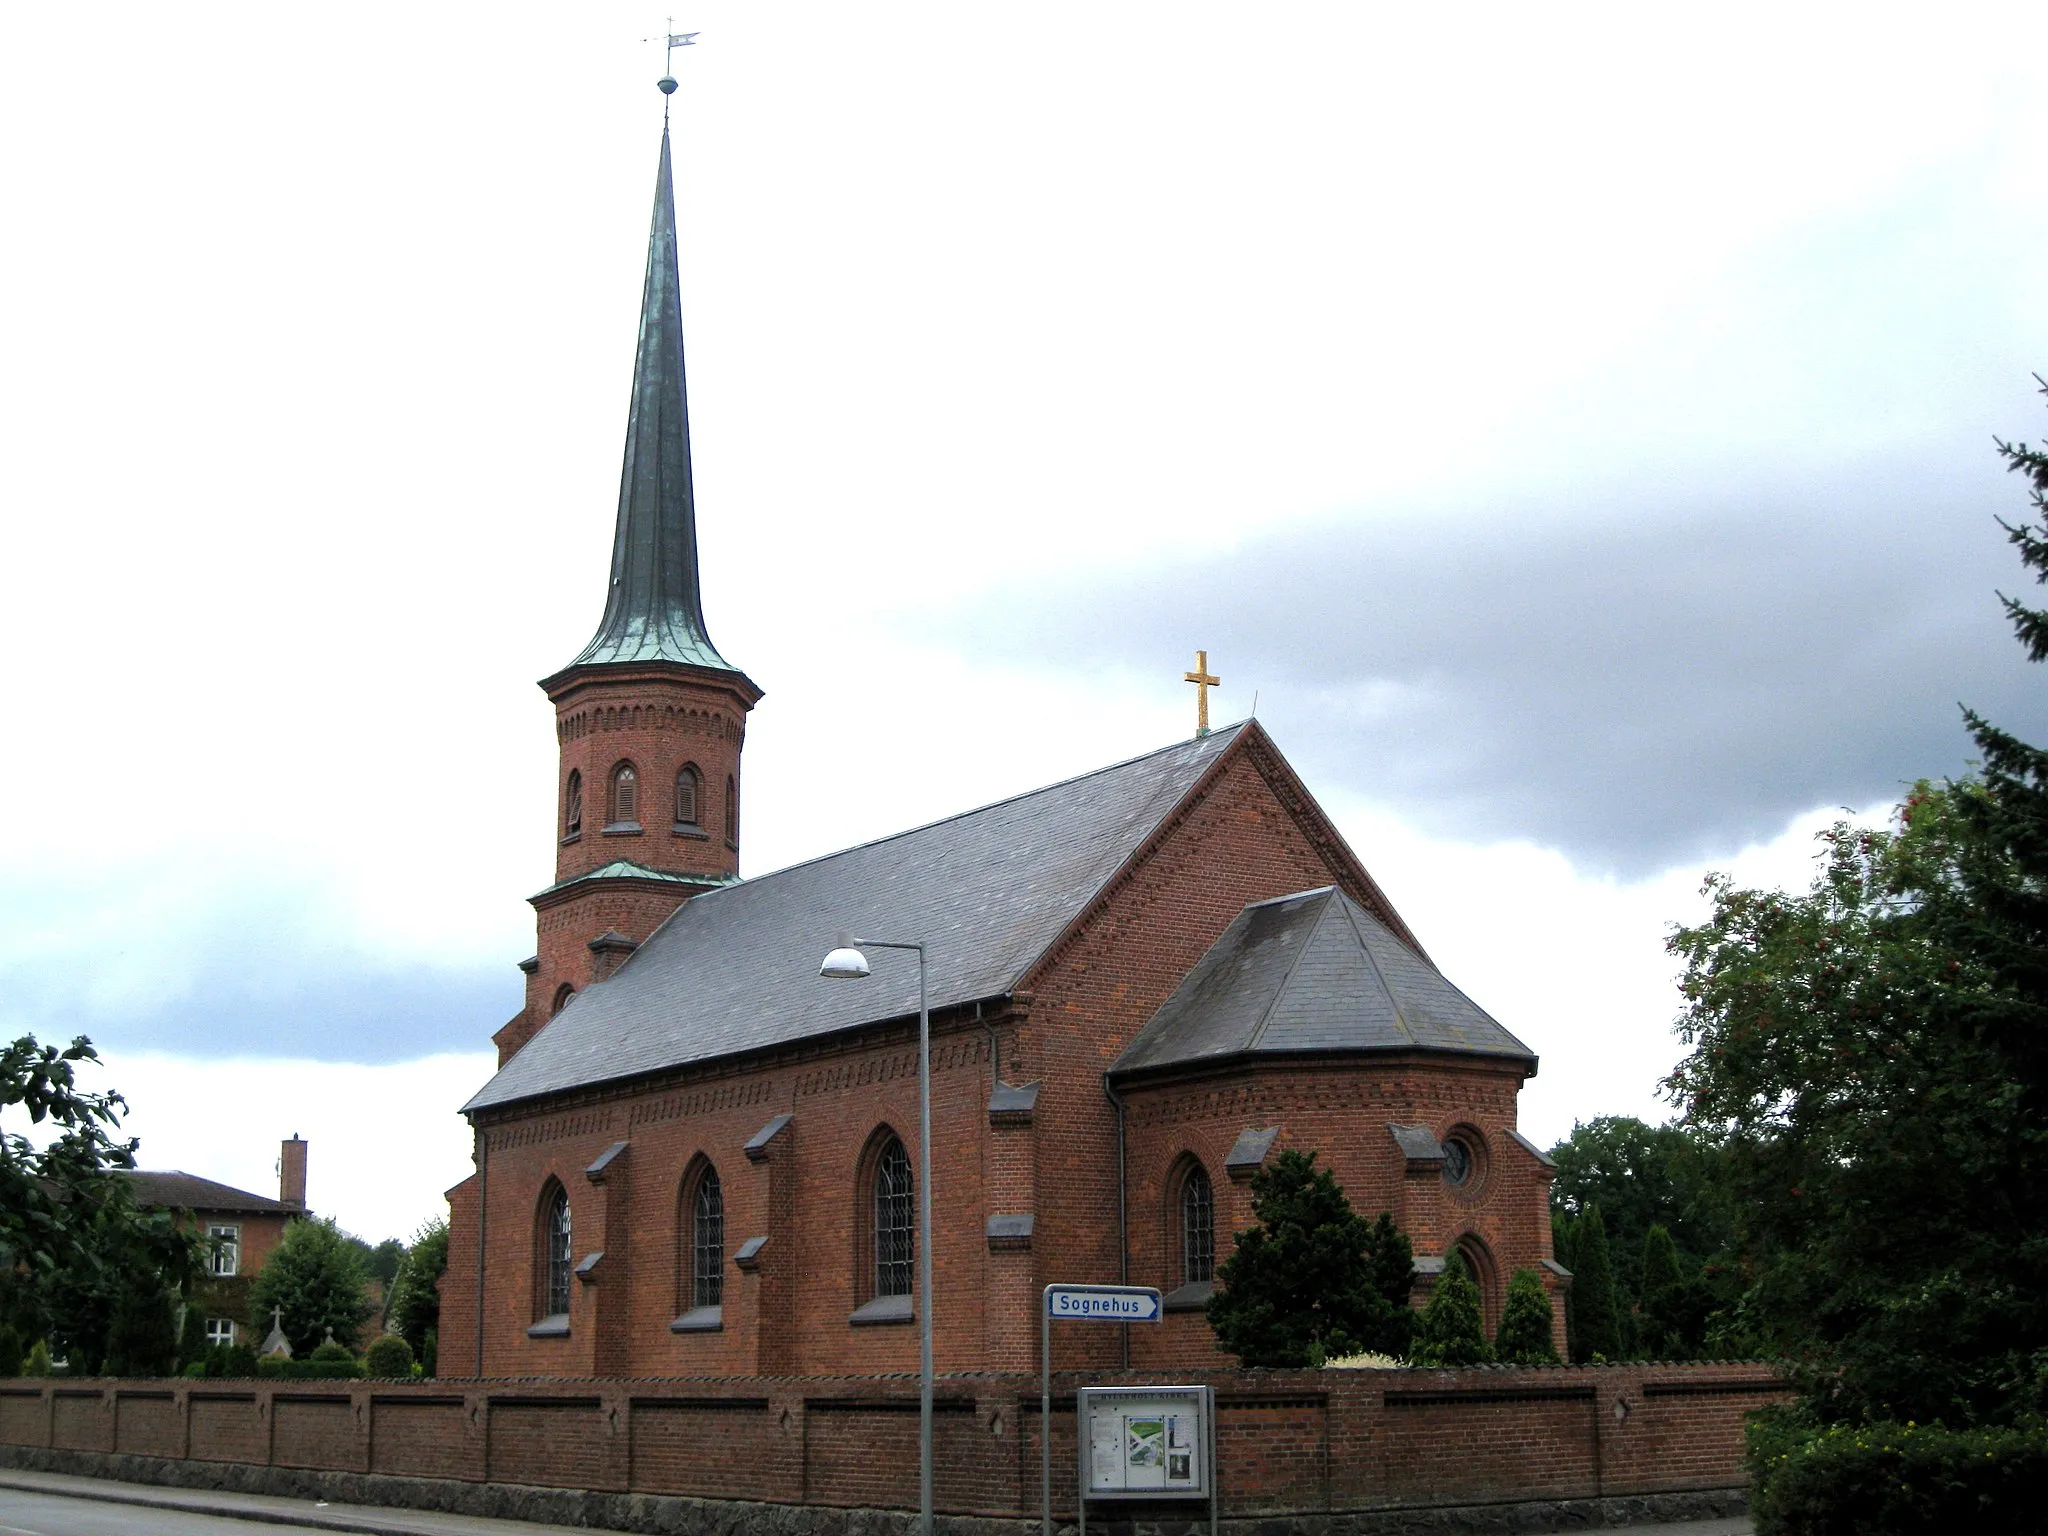 Photo showing: The church "Hylleholt Kirke" of the small town "Faxe Ladeplads". The town is located on South Zealand in east Denmark.